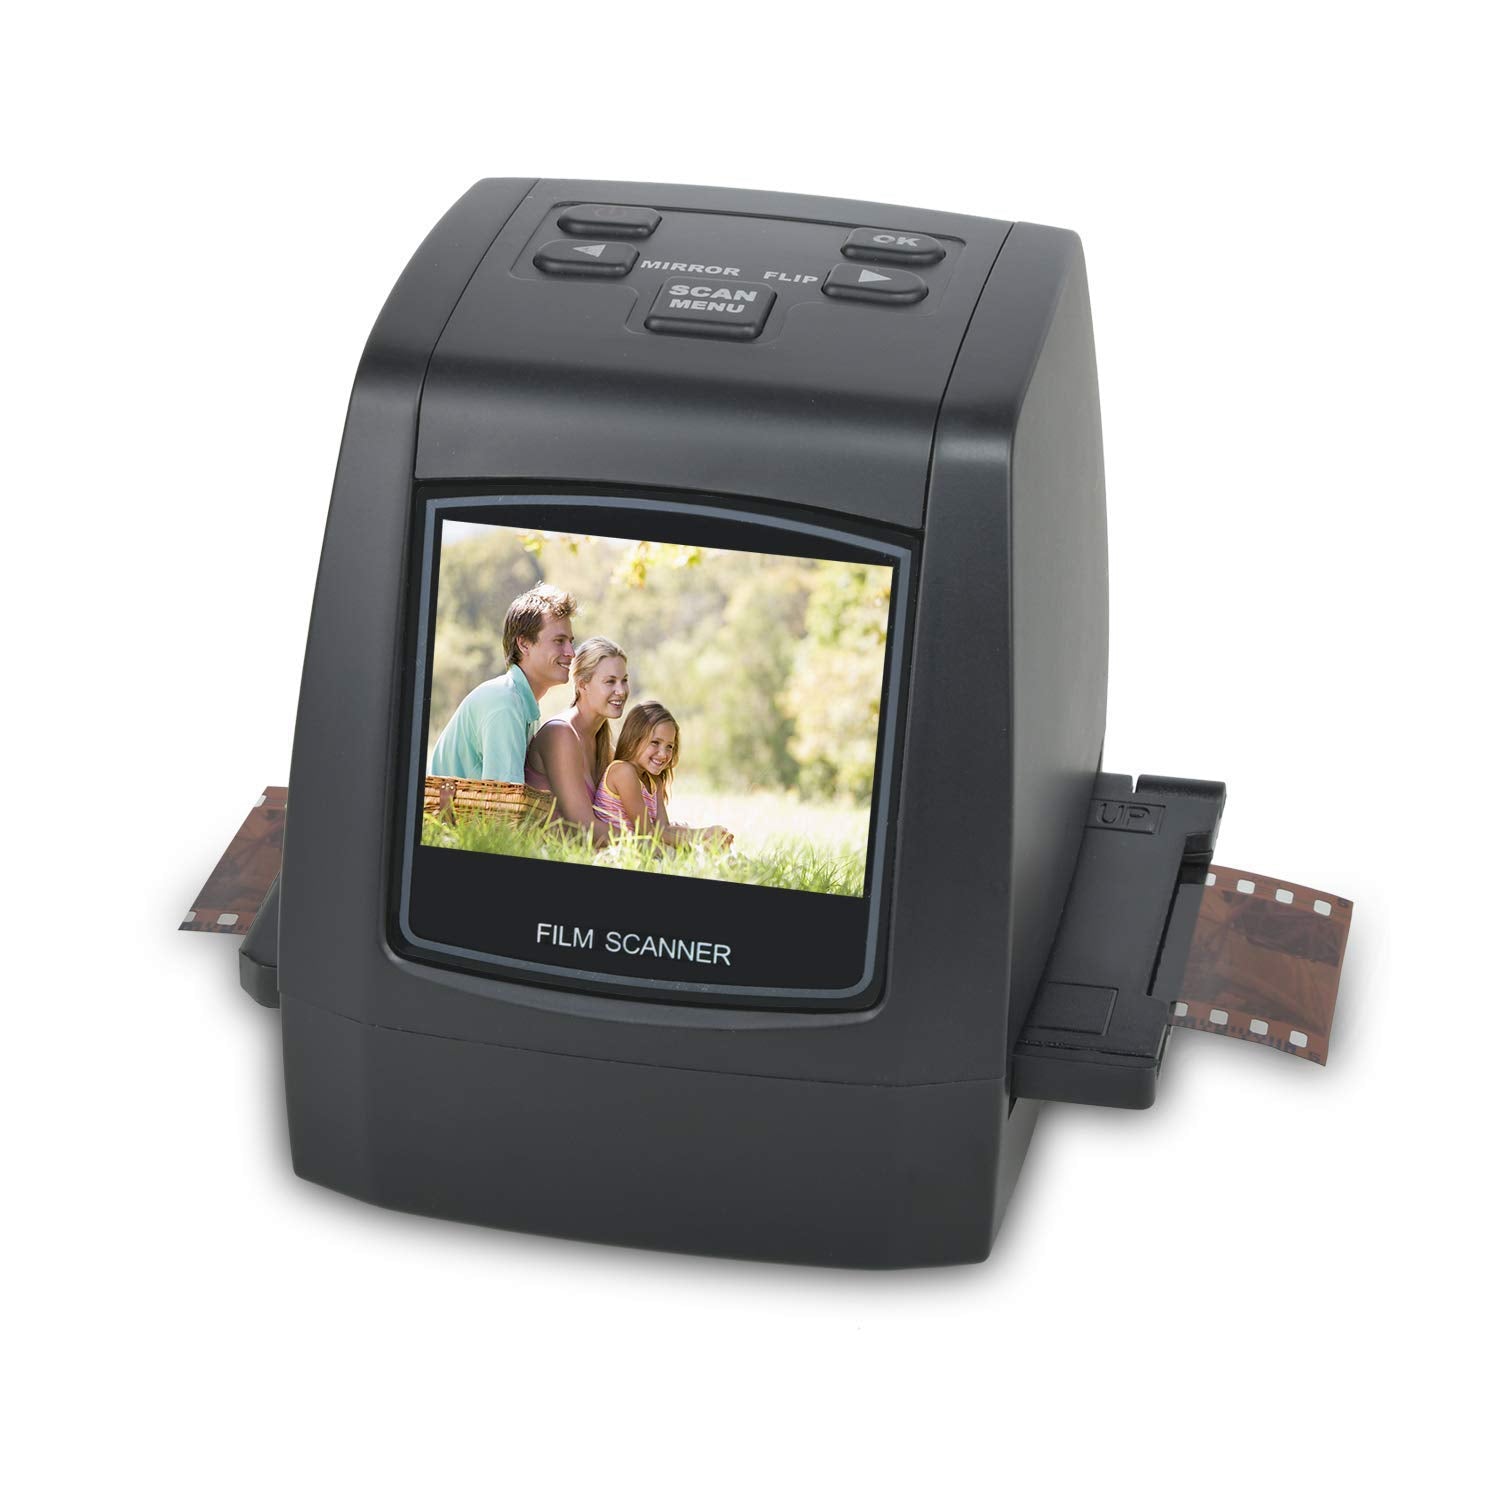 DIGITNOW Scanners 22MP Converts 8 Films